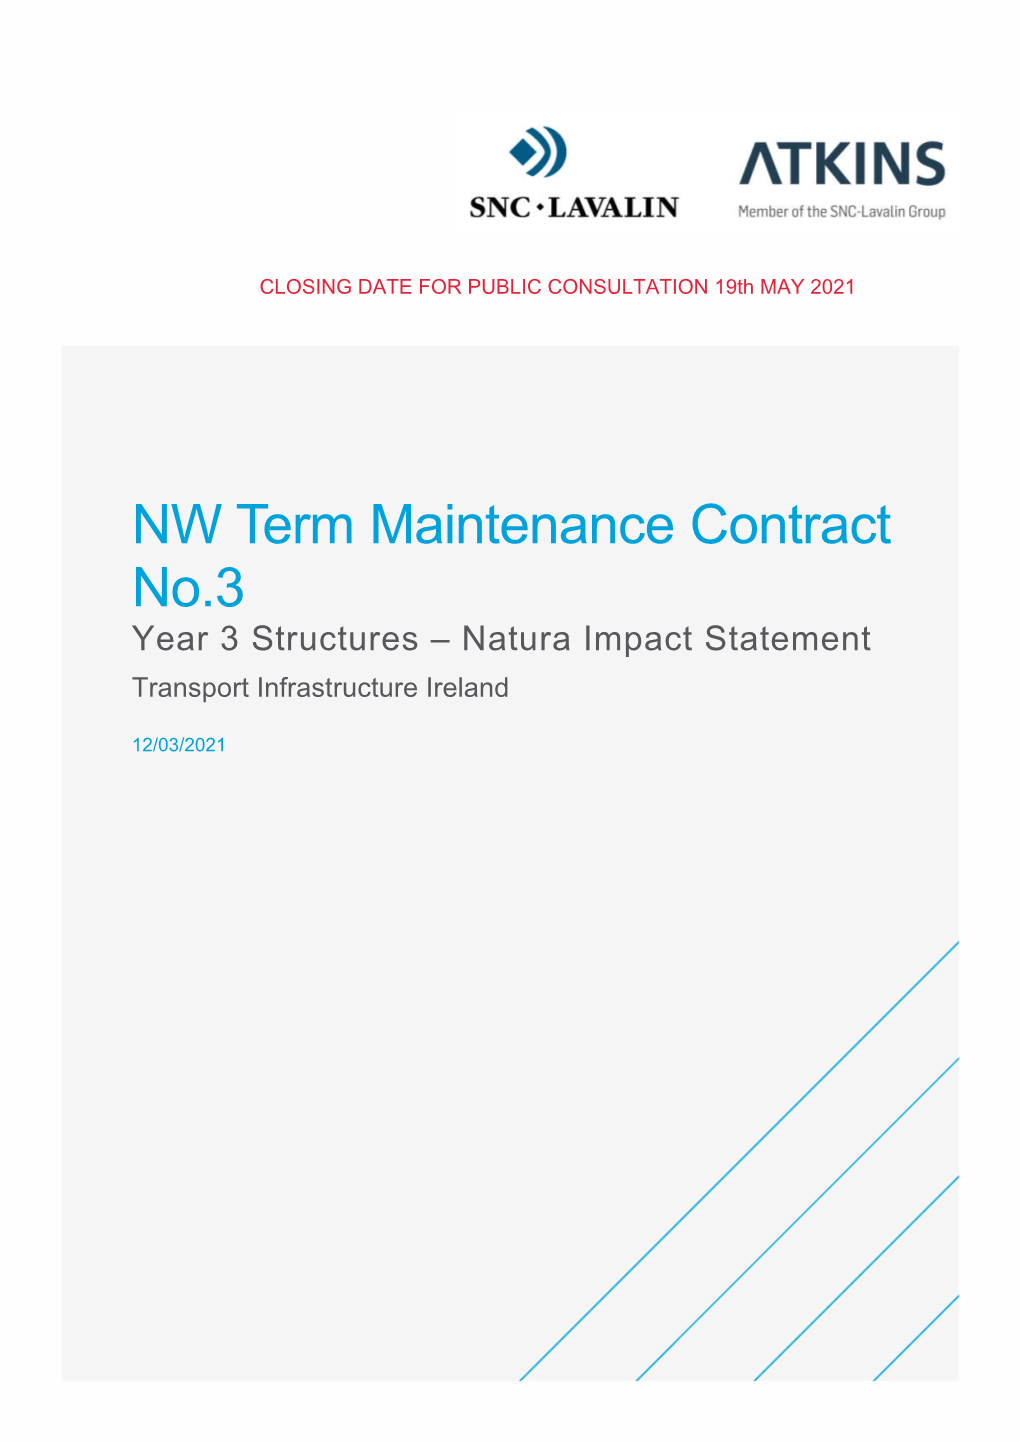 NW Term Maintenance Contract No.3 Year 3 Structures – Natura Impact Statement Transport Infrastructure Ireland